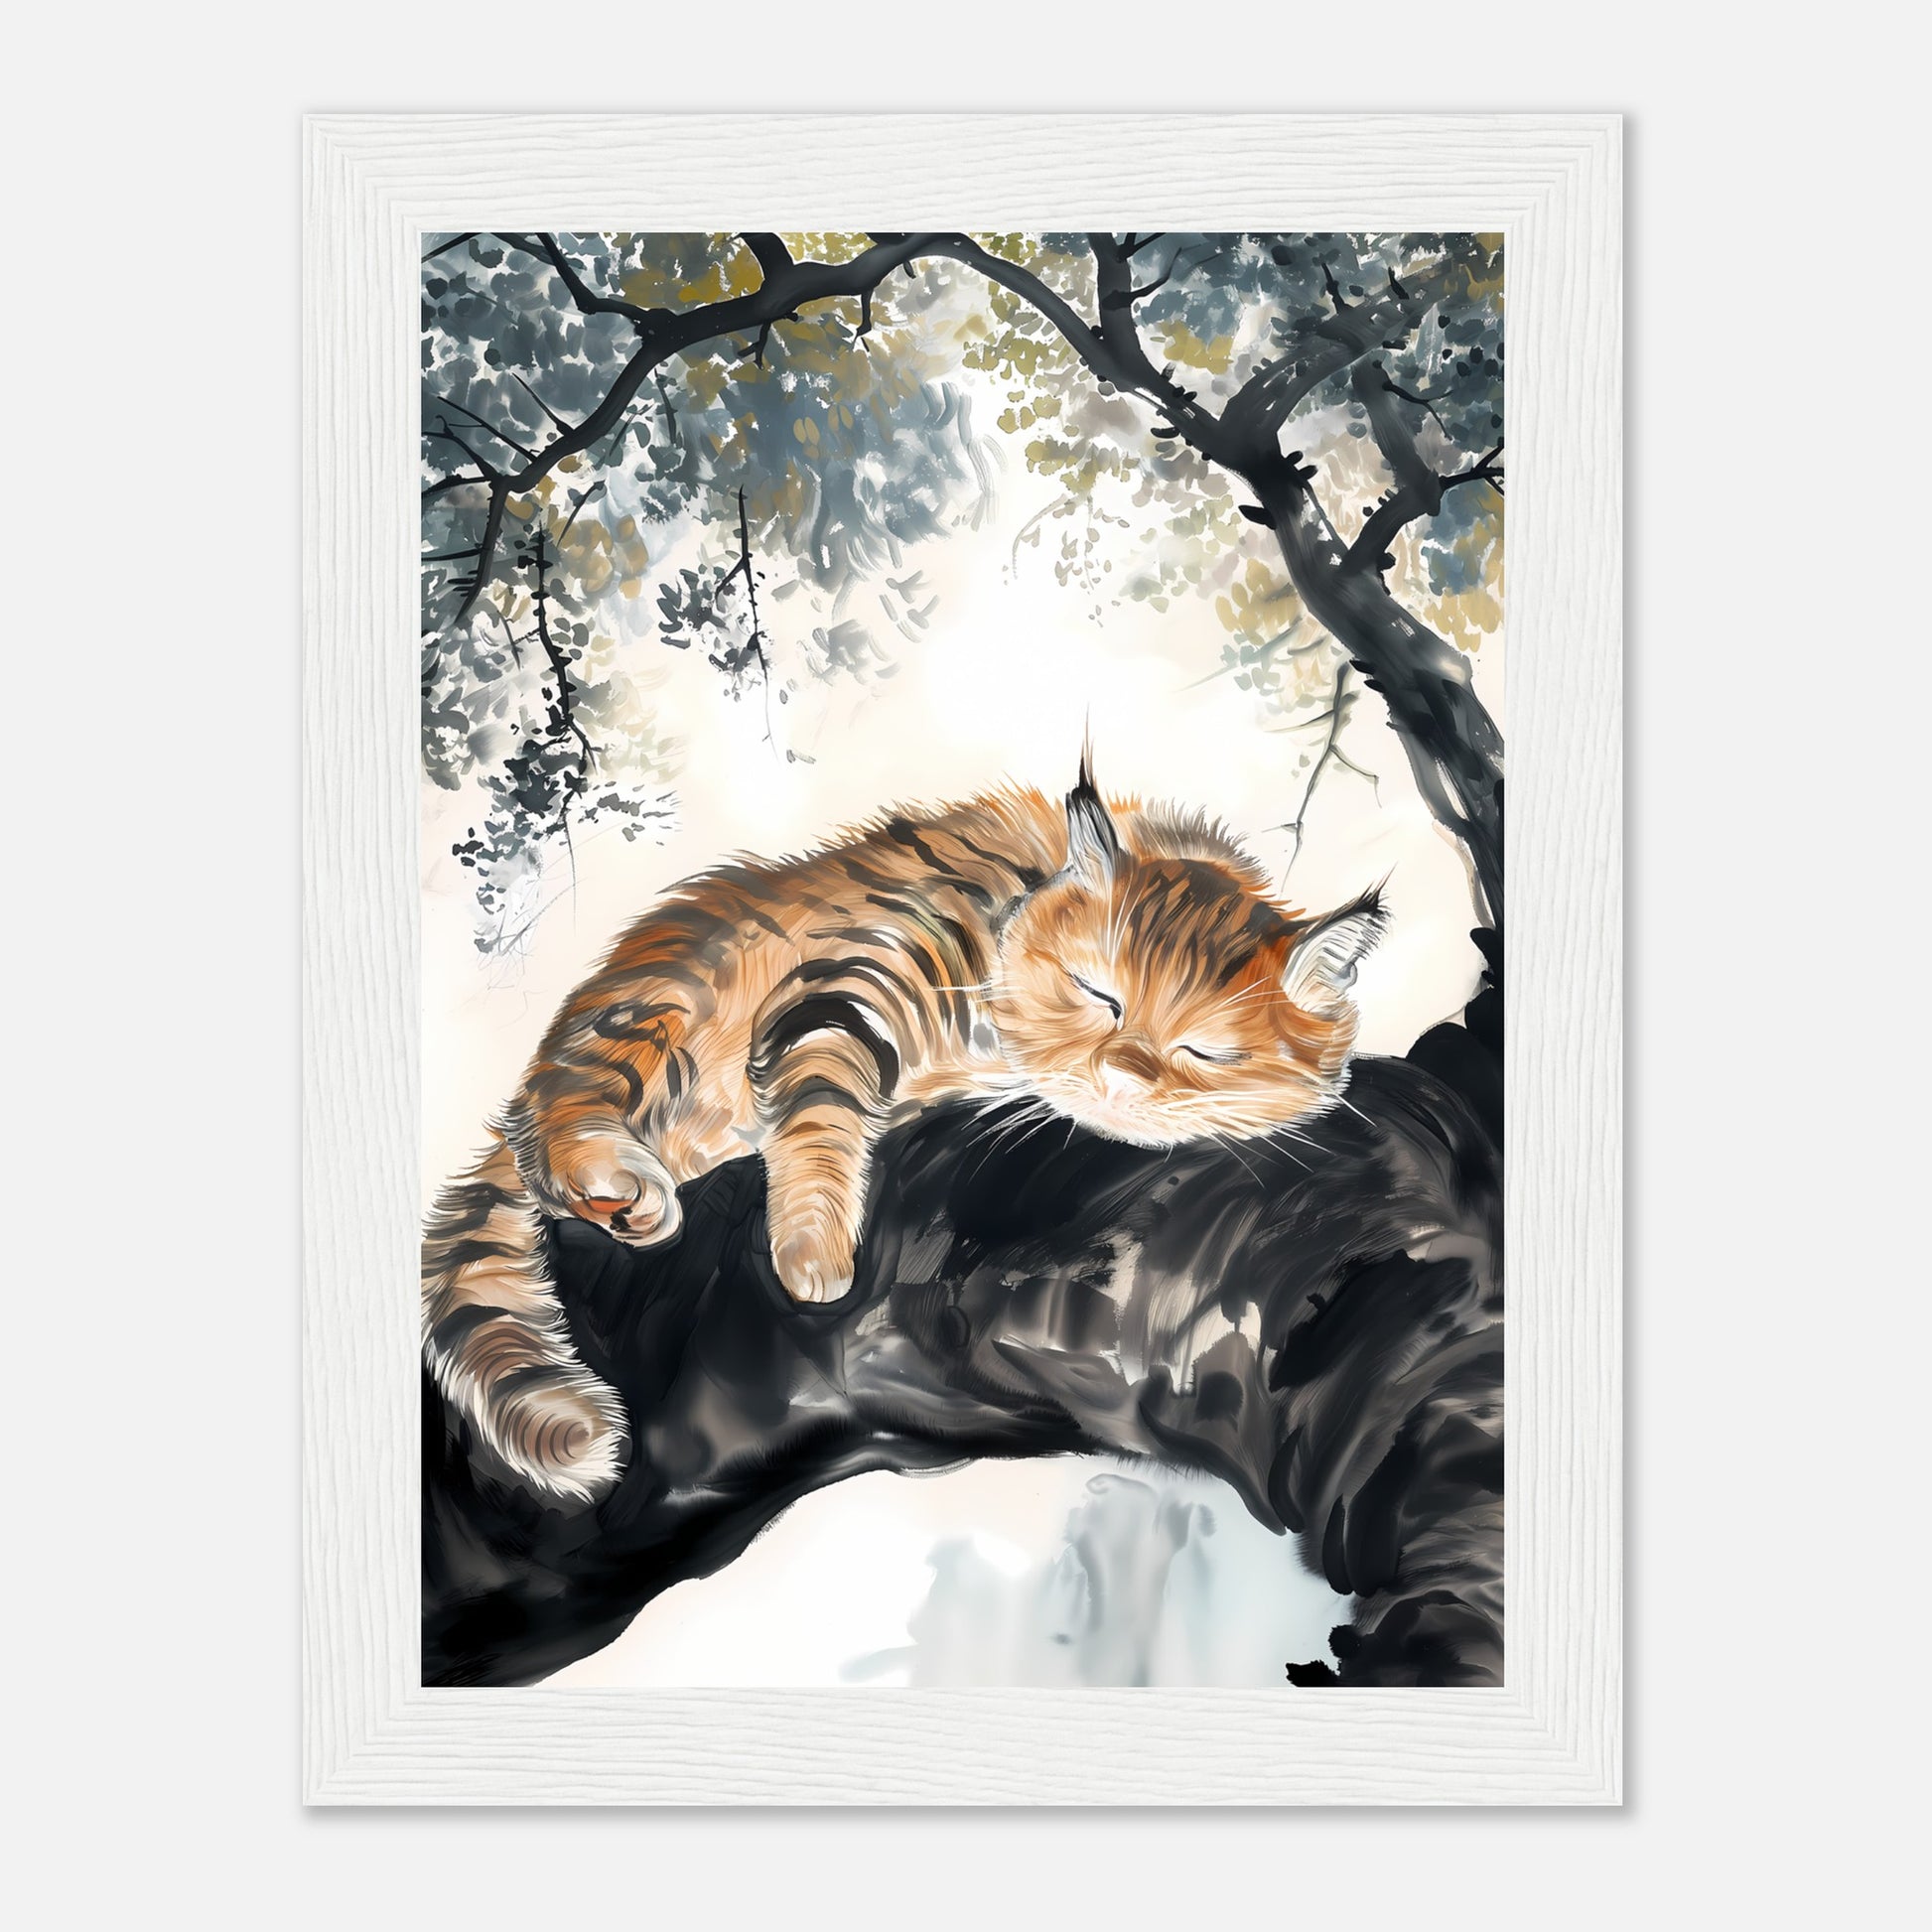 A painting of an orange tabby cat lounging on a tree branch.